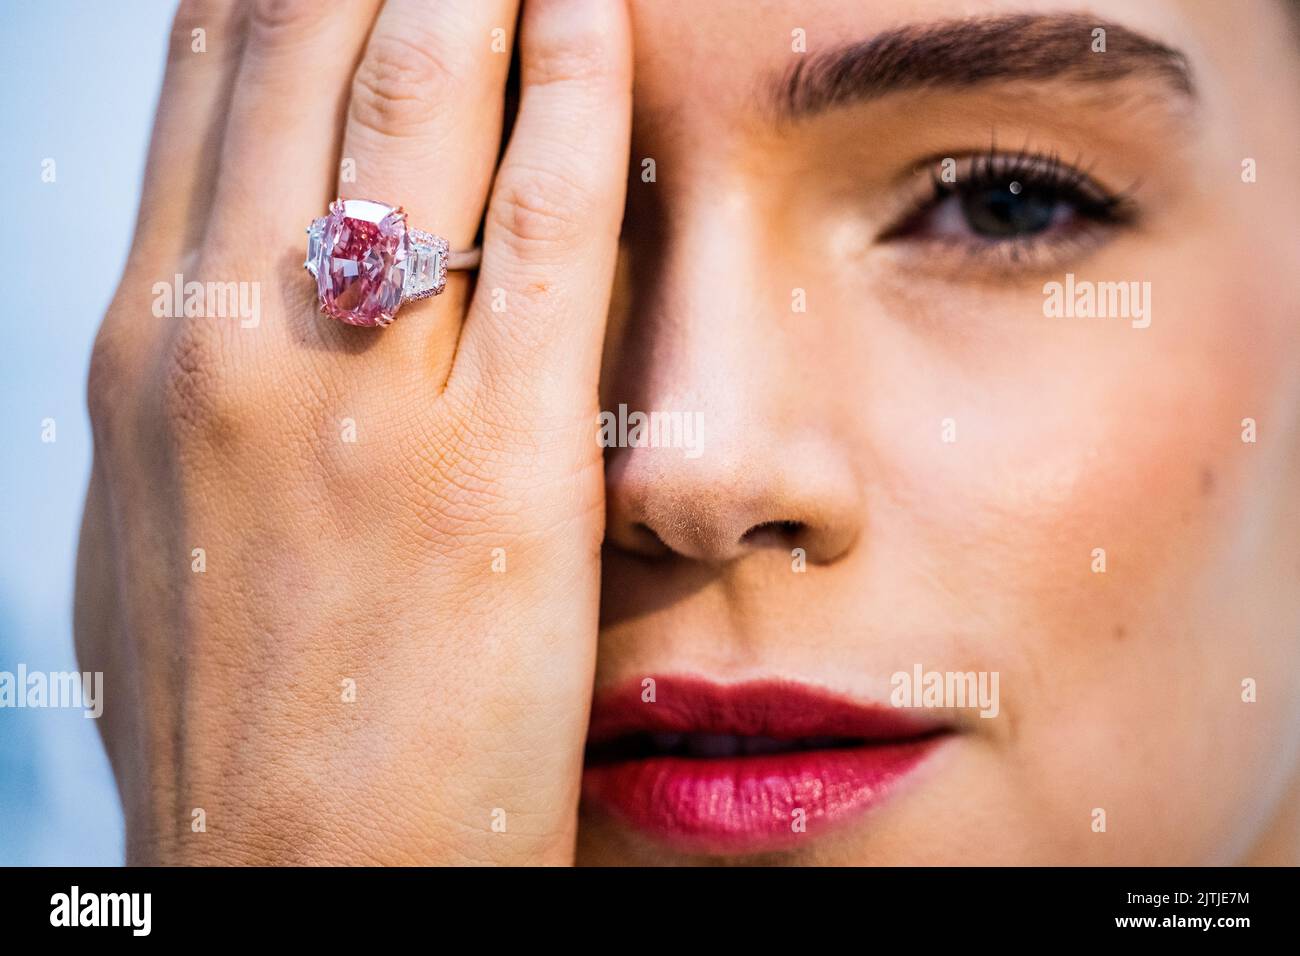 London, UK. 31st Aug, 2022. The Williamson Pink Star - Vivid Pink Diamond of Over 10 Carats, estimated in excess of $21 million, at Sothebys, New Bond Street. One of the Purest, Pinkest Diamonds Ever to Appear at Auction and one of Only Two Internally Flawless Fancy. It will be offered at Sotheby's Hong Kong this October. Credit: Guy Bell/Alamy Live News Stock Photo